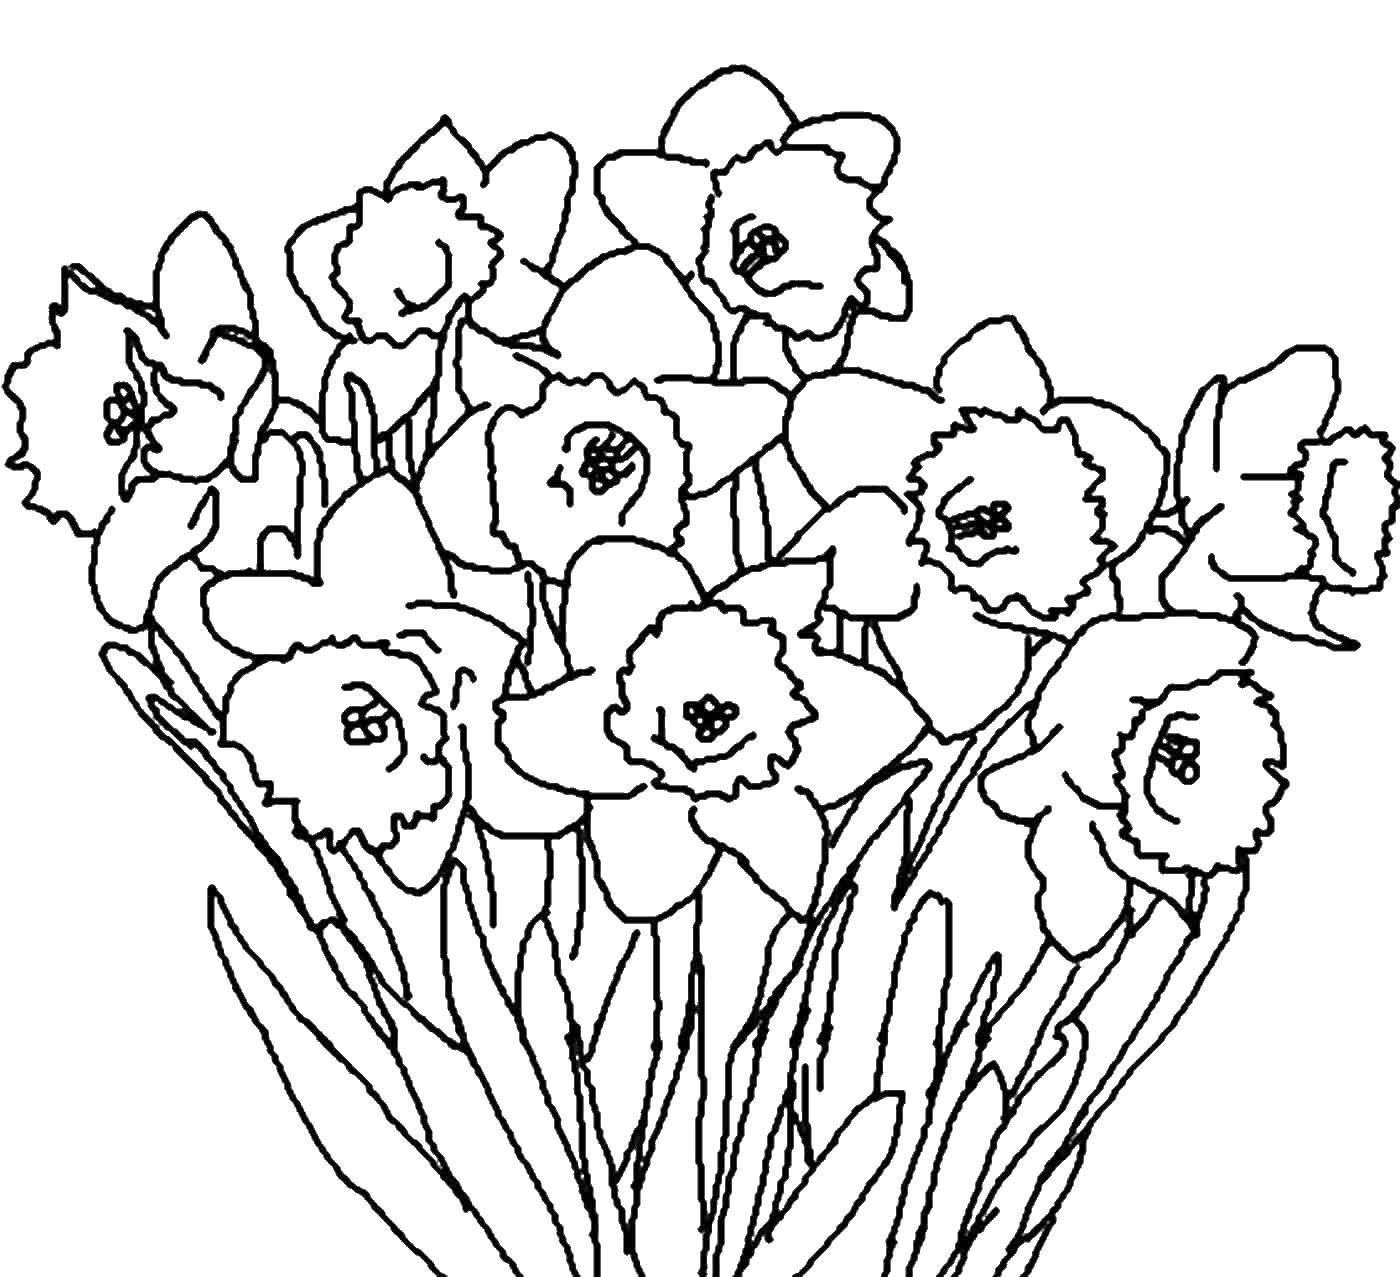 Coloring Daffodils. Category flowers. Tags:  Narcissus. flowers.